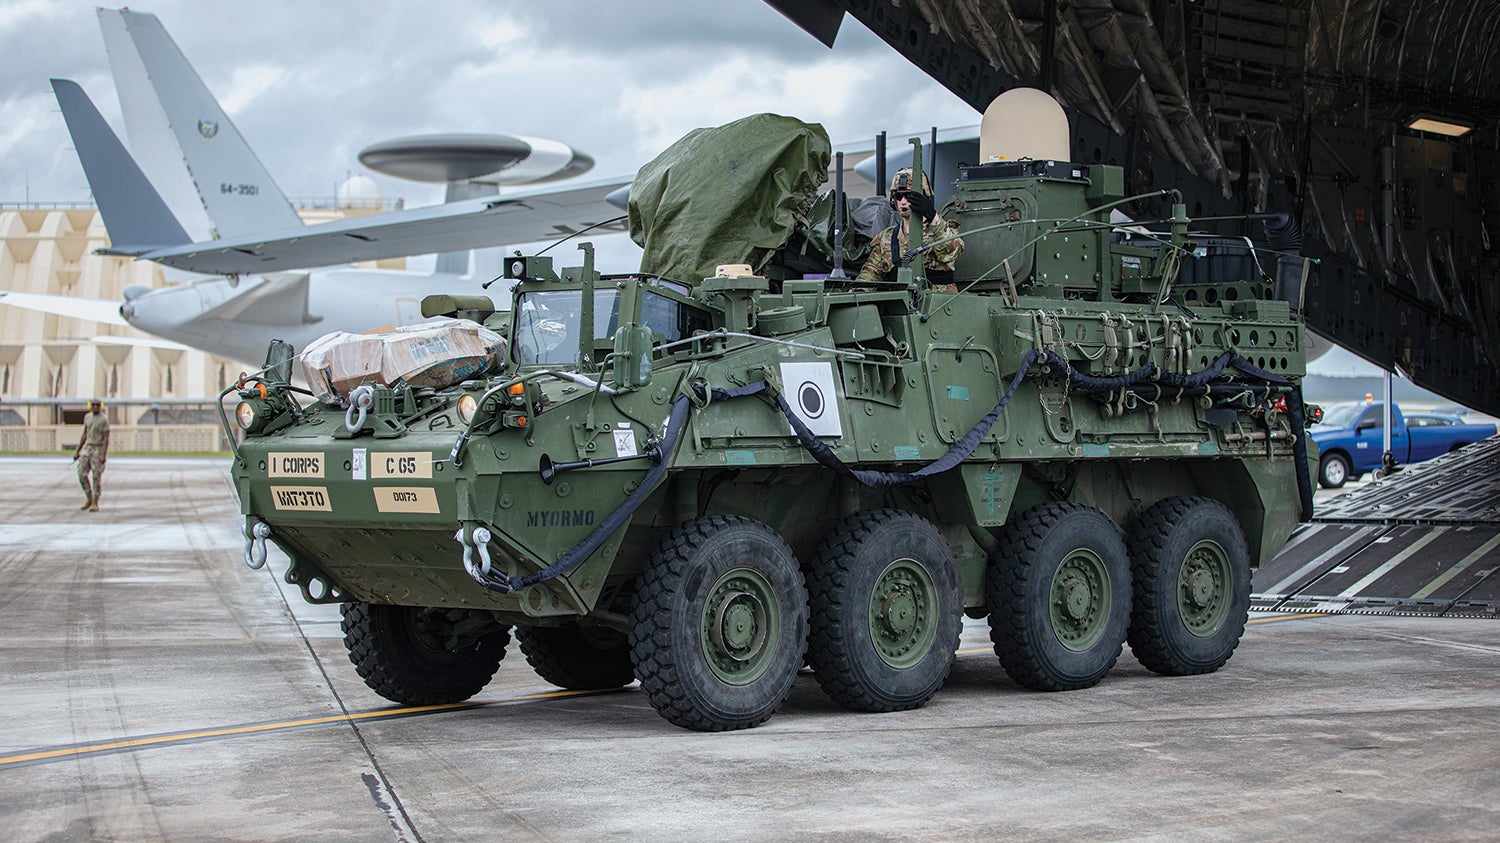 Soldiers with the 17th Field Artillery Brigade, Joint Base Lewis-McChord, Washington, prepare High Mobility Artillery Rocket Systems for transport to Australia for Exercise Talisman Saber. (Credit: U.S. Army/Sgt. Joshua Oh)